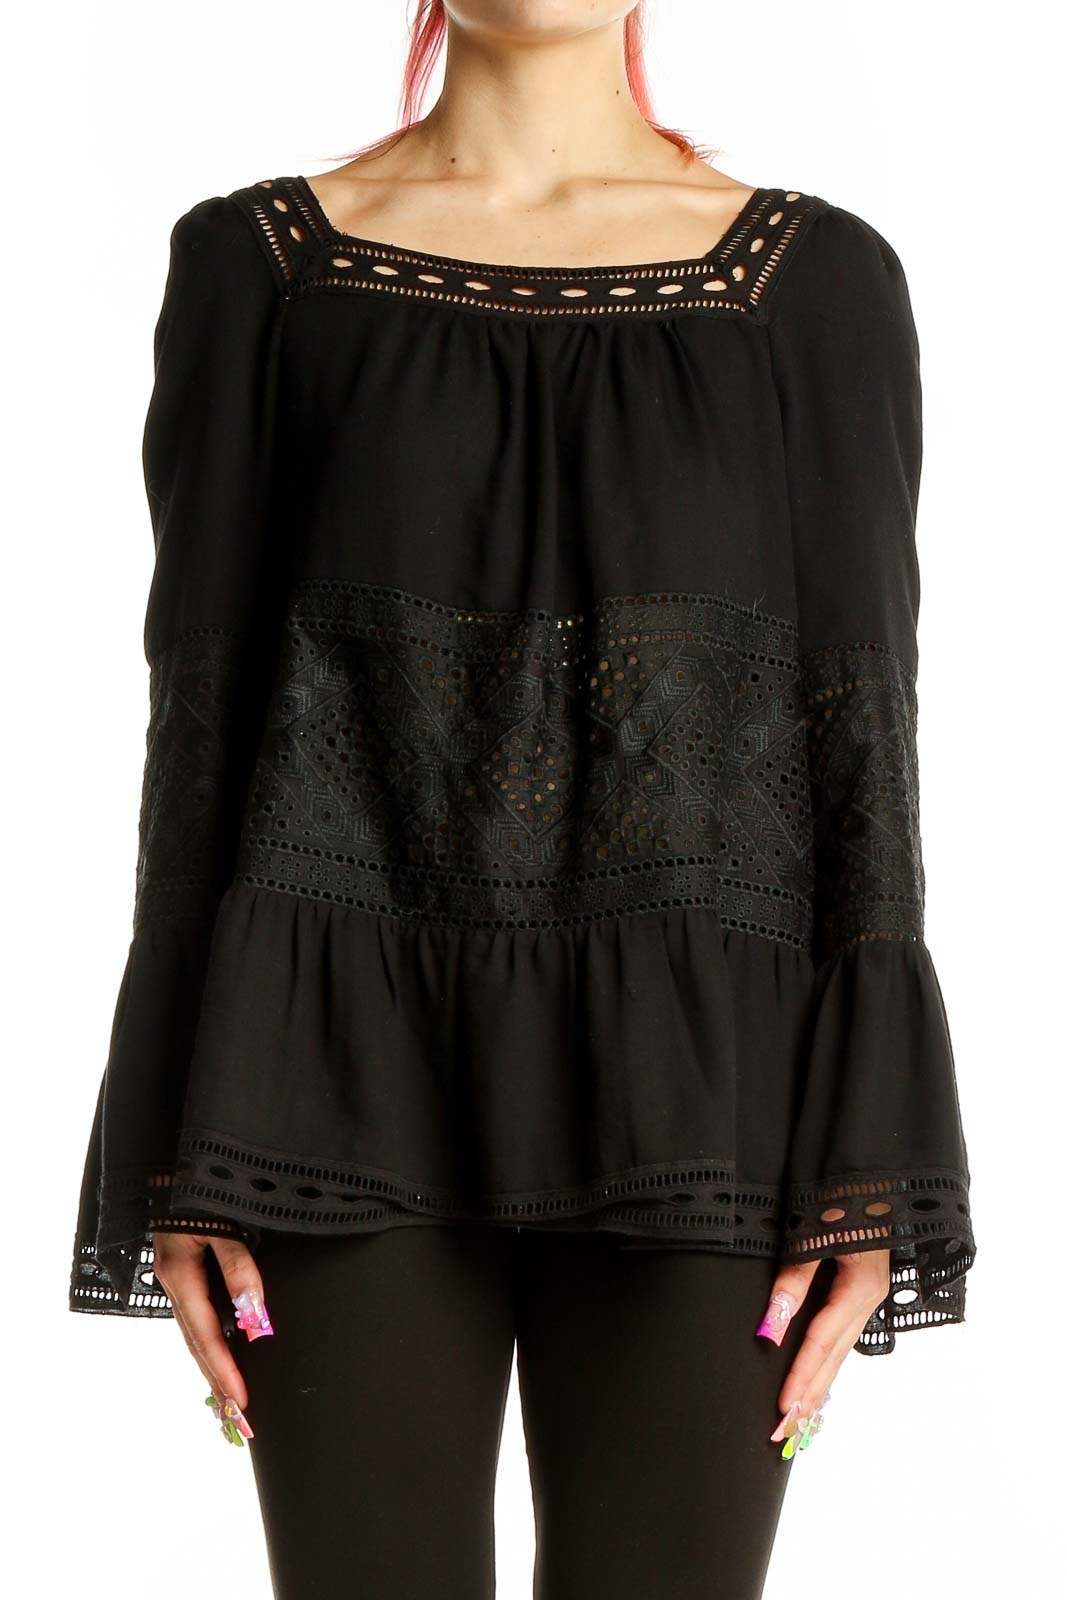 Black Lace Solid Top Front